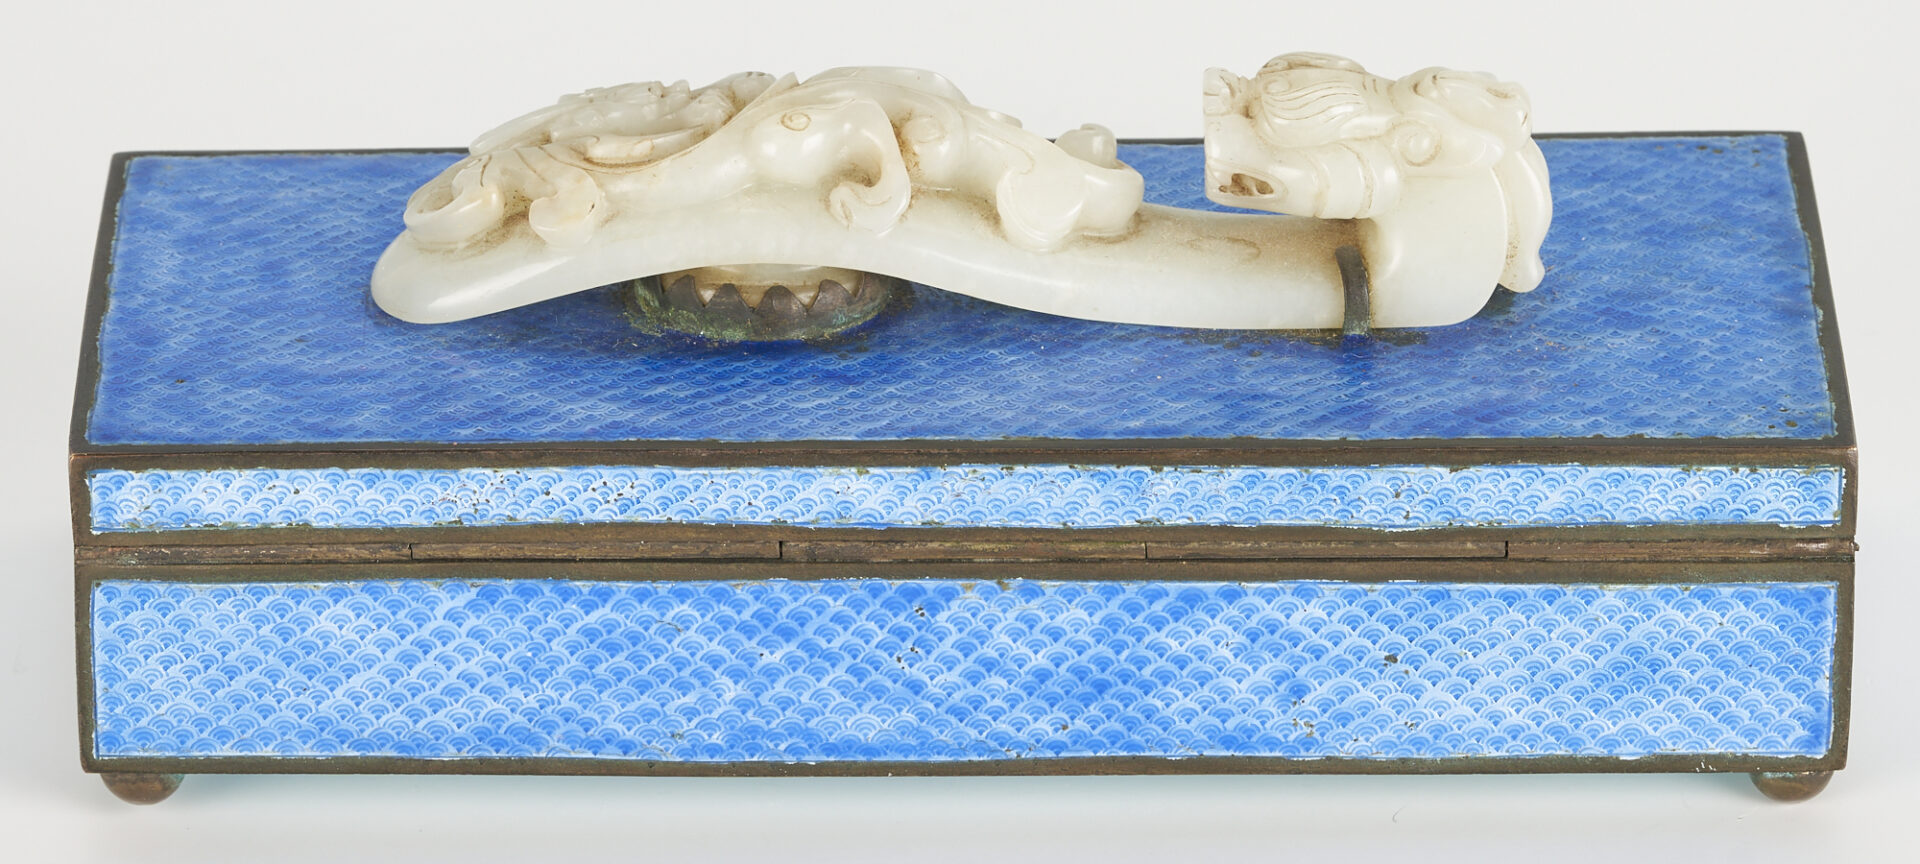 Lot 5: Chinese Jade and Cloisonne Enamel Box